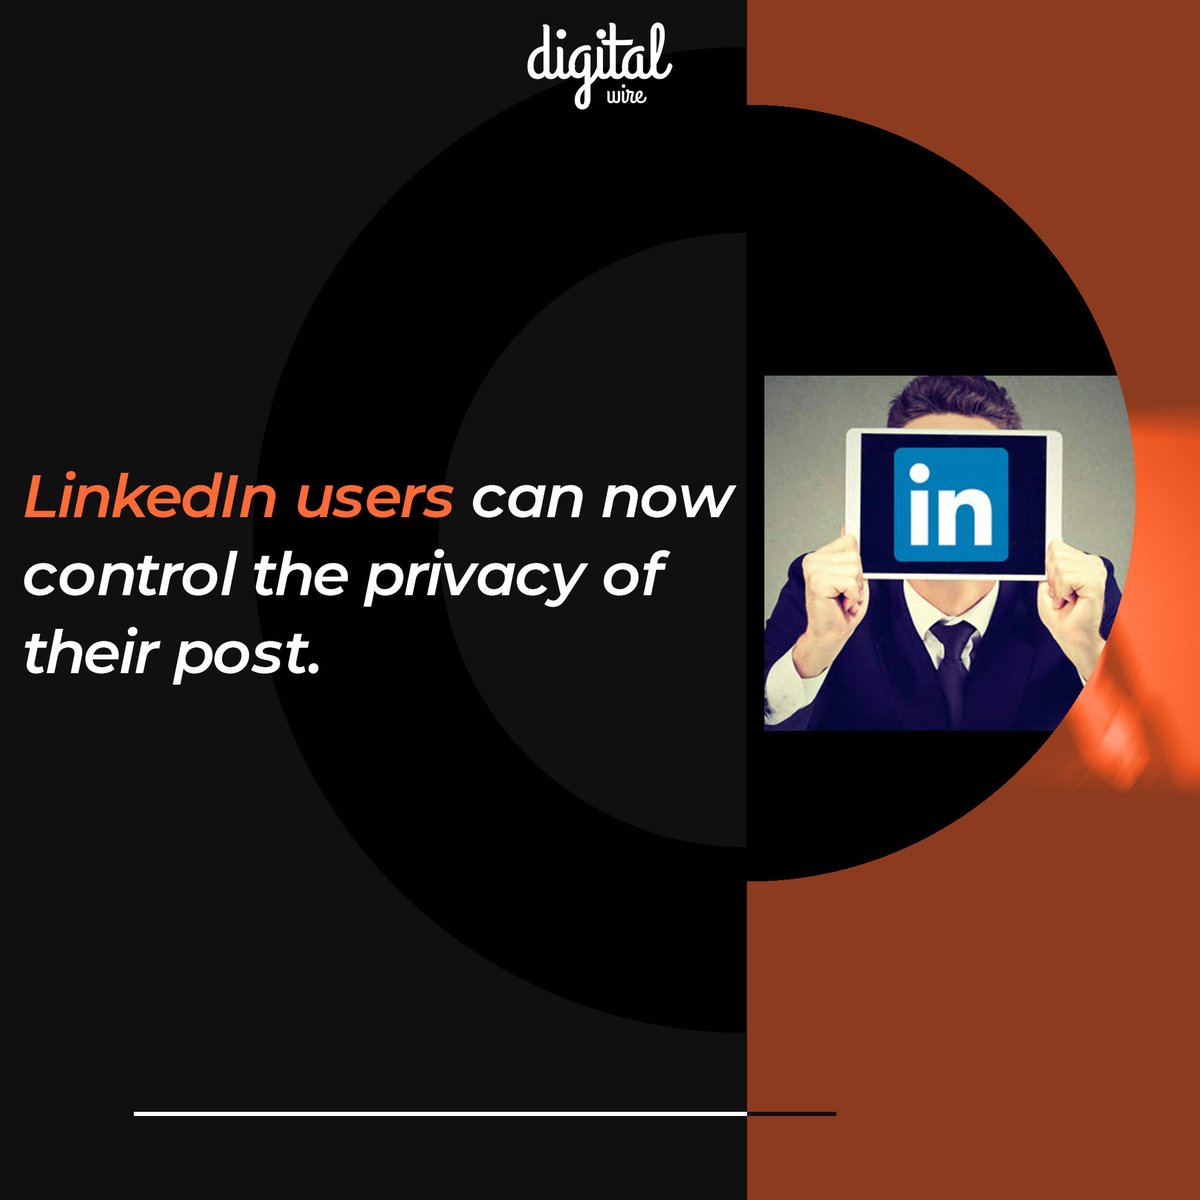 Amidst privacy issues of Whats App. LinkedIn comes up with its privacy control for LinkedIn Post. #SocialMedia  #socialmediamarketing